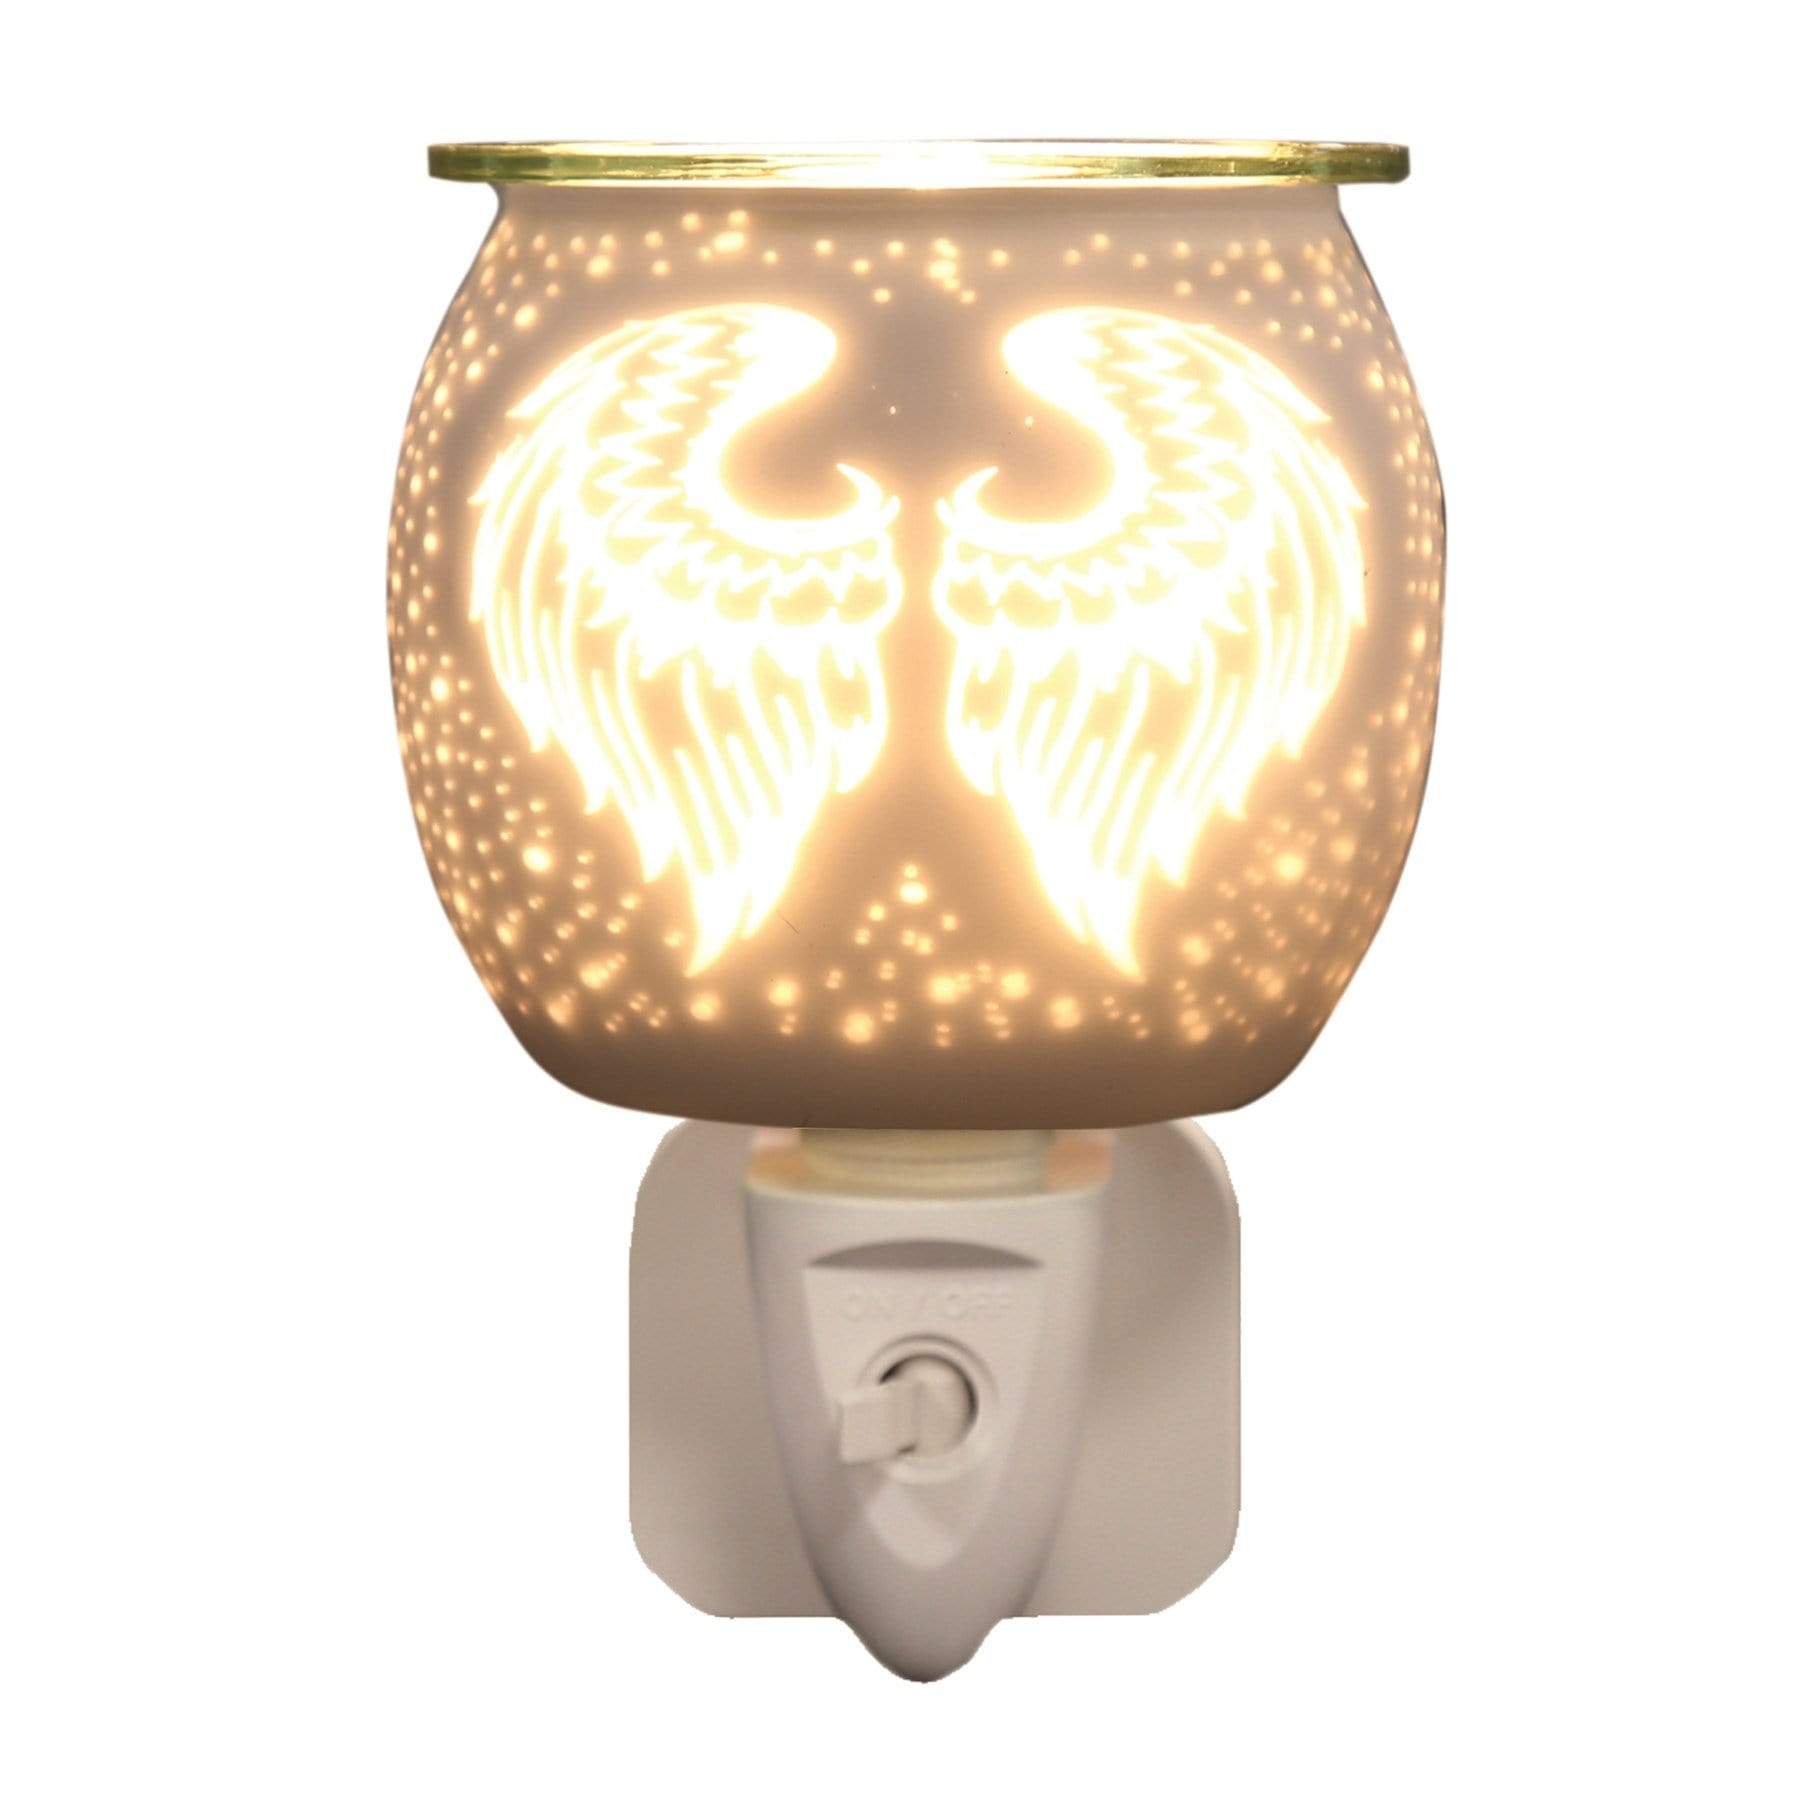 Aroma Accessories Plug In Melt Warmer Aroma Accessories Wall Plug In Wax Melt Warmer - White Satin Angel Wings